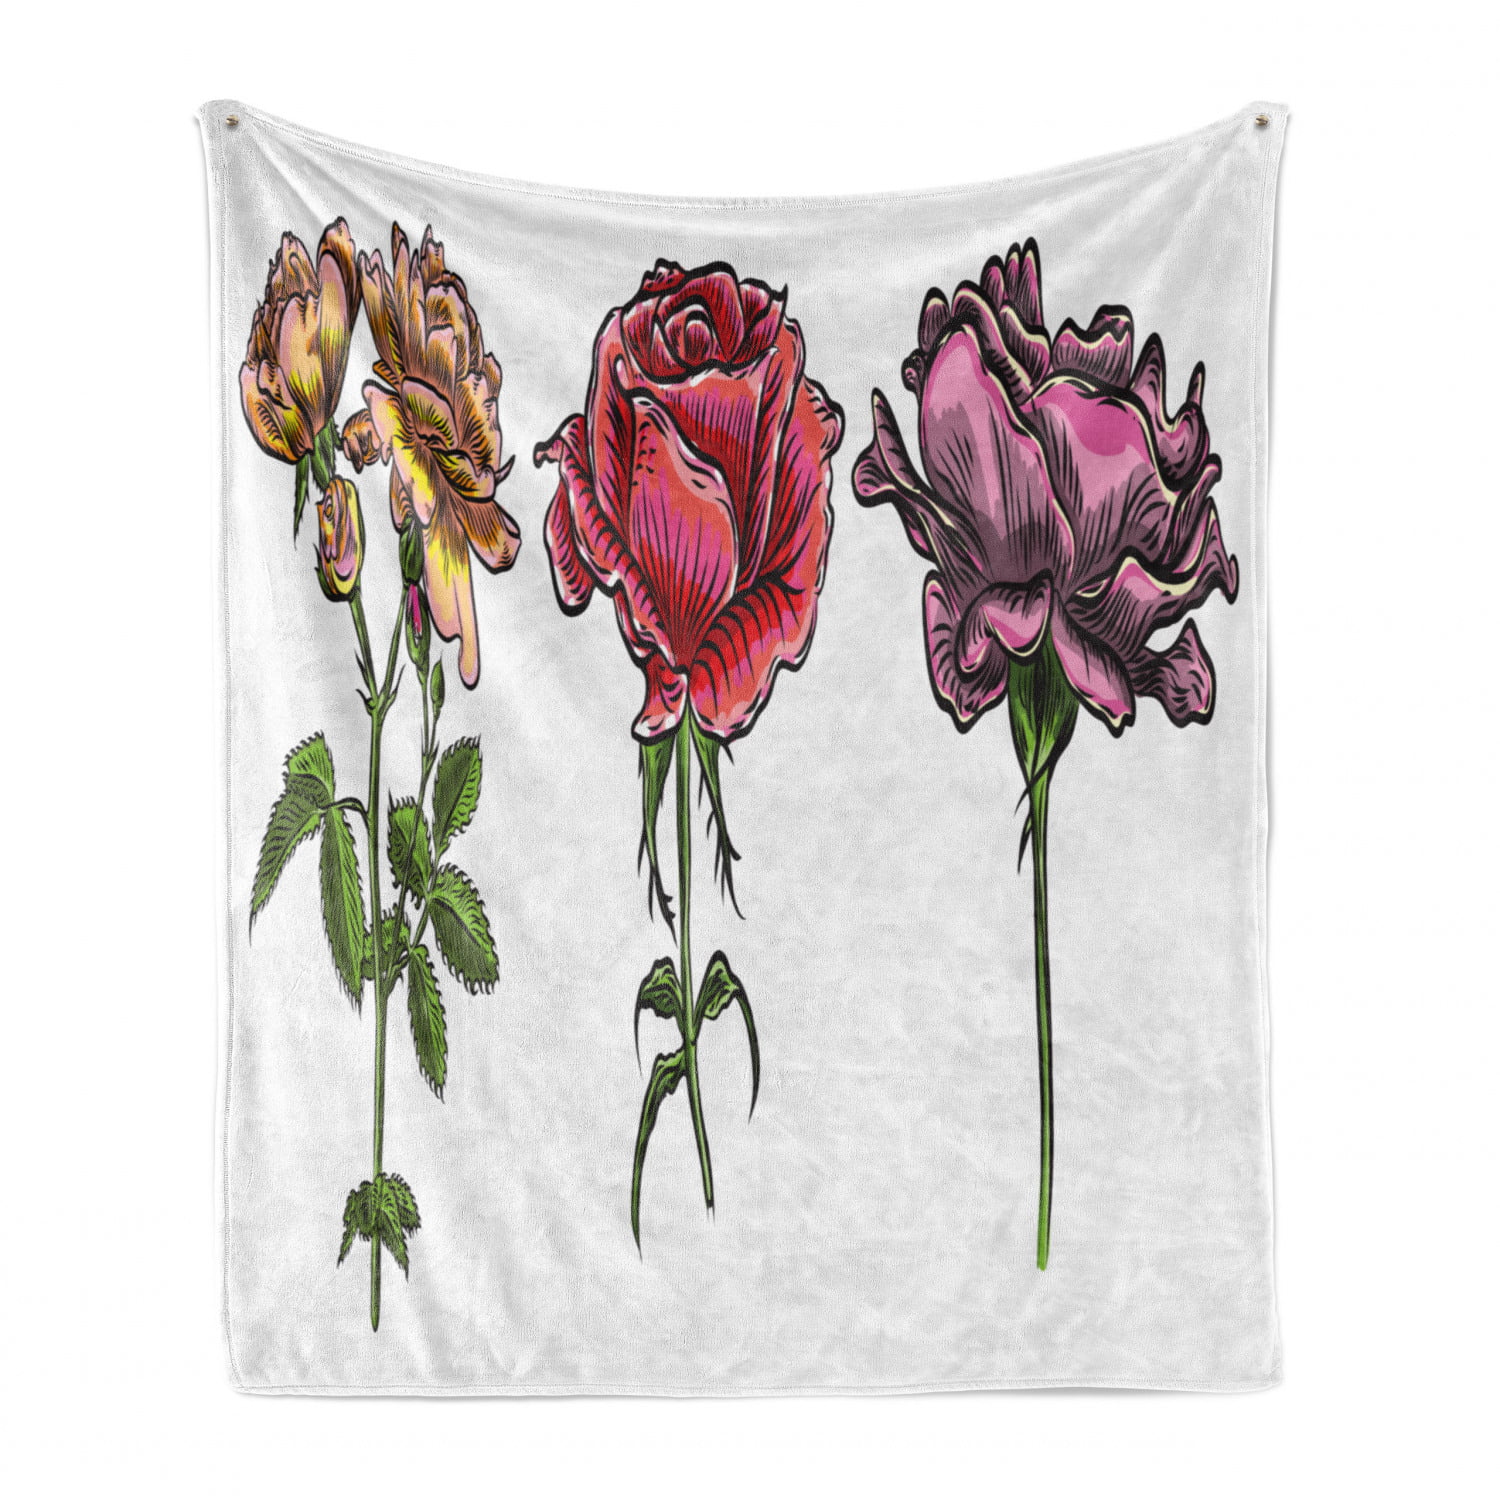 Flannel Fleece Accent Piece Soft Couch Cover for Adults Watercolor Art of Romantic Flowers and Leaves Branches Blossoming Lunarable Rose Throw Blanket Fuchsia Reseda Green 70 x 90